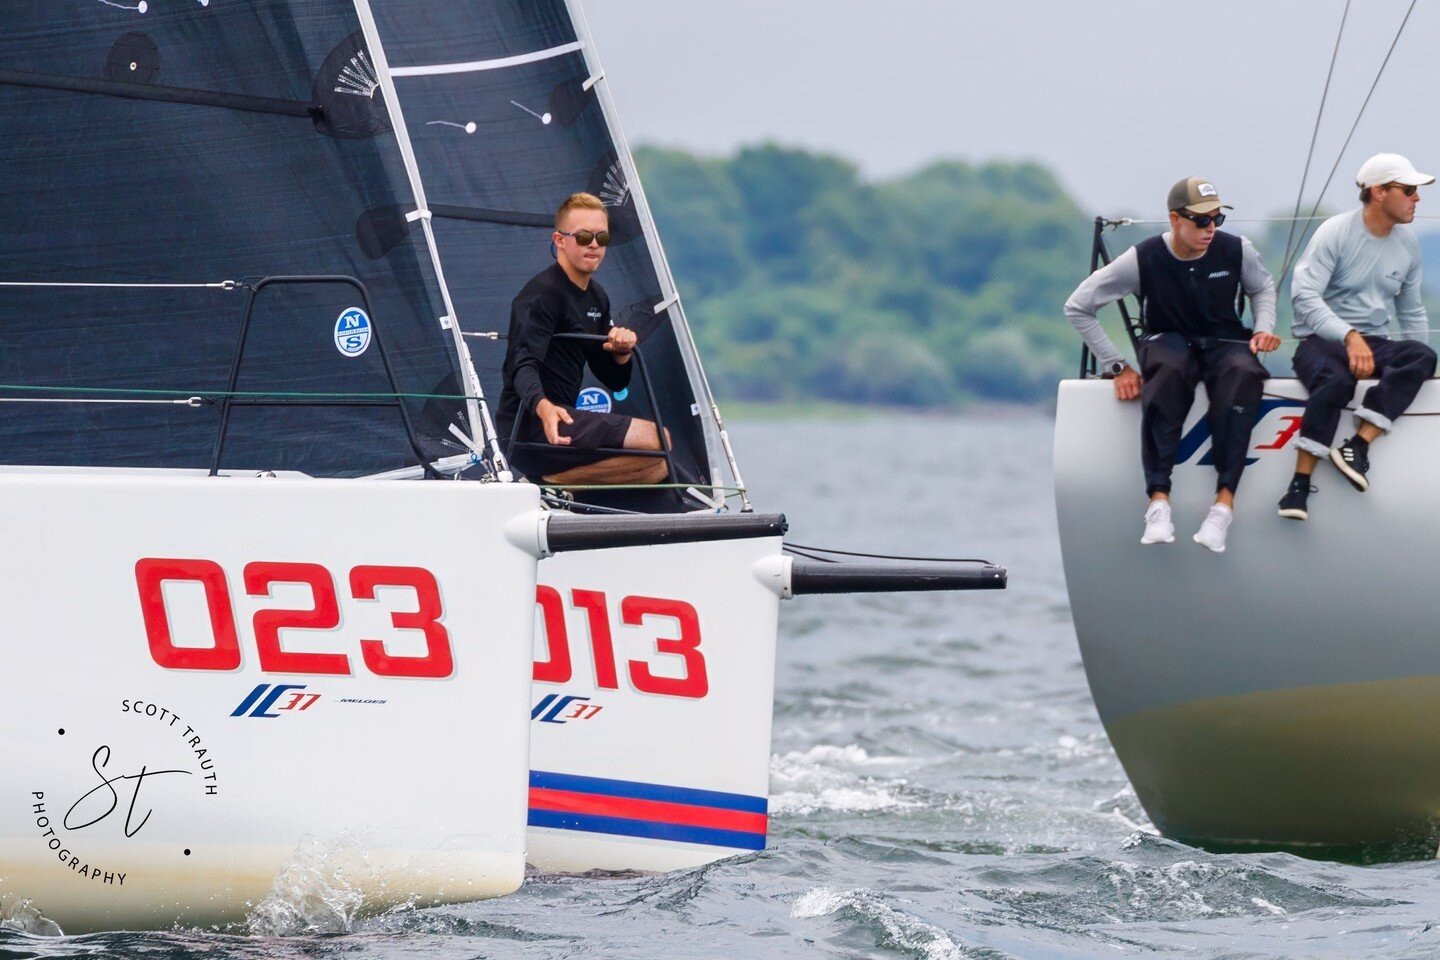 #frontendfriday 
What a great day on the water with the #ic37 @ic37class 
There were some storms and postponements but the RC had great patience and they were able to get two races off!  @nyyc_regattas 
Pictured is @max.hooker bowman on @gamecocksail